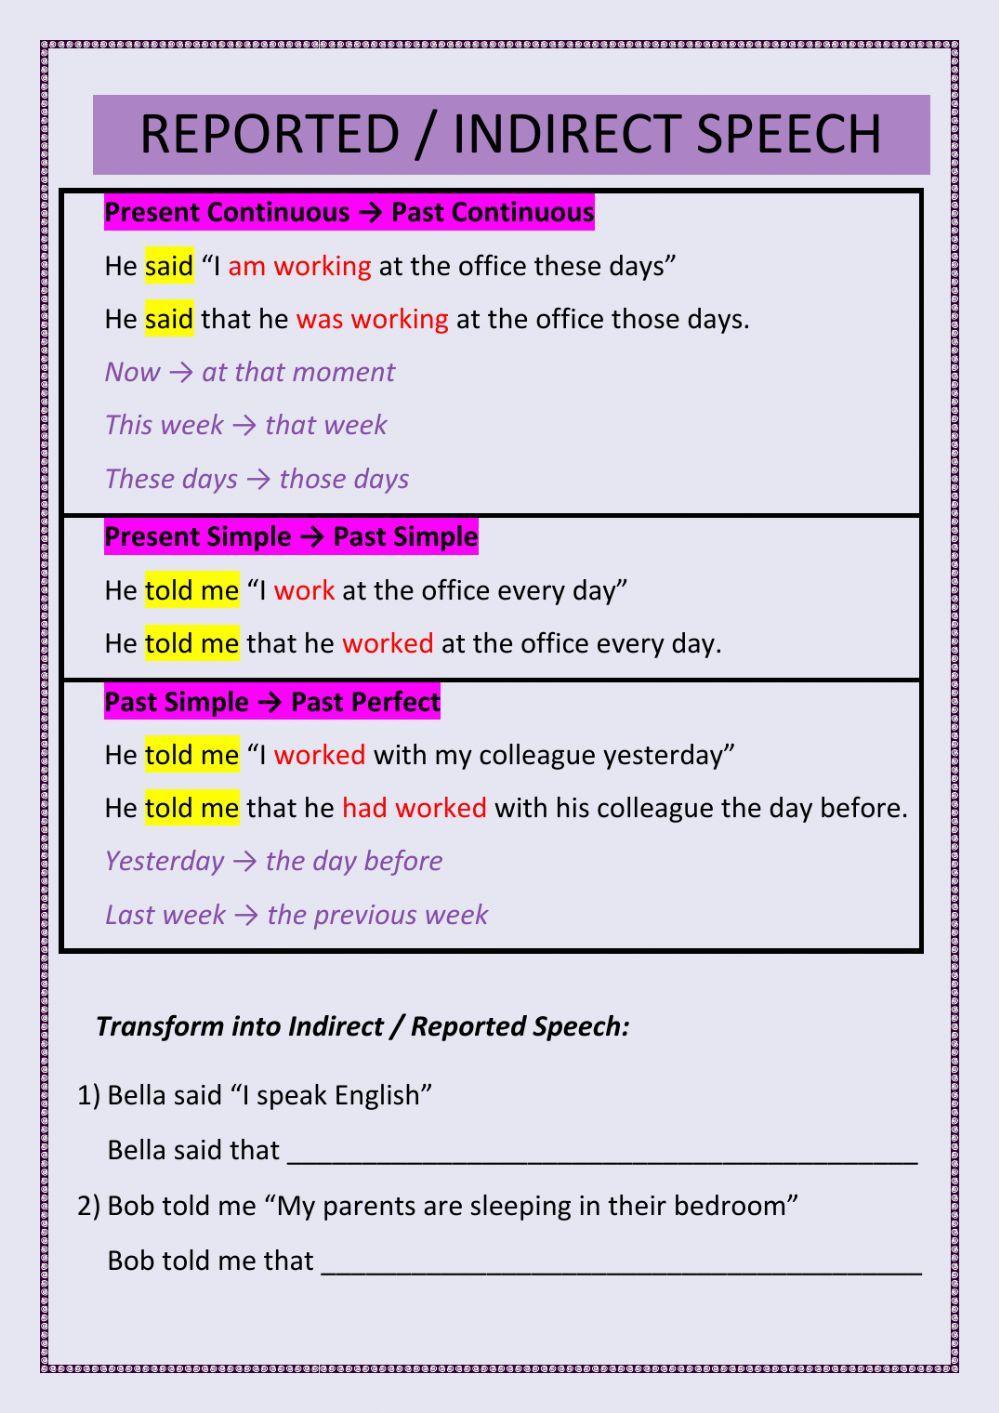 Reported - Indirect Speech (Present Simple, Present Continuous, Past Simple)